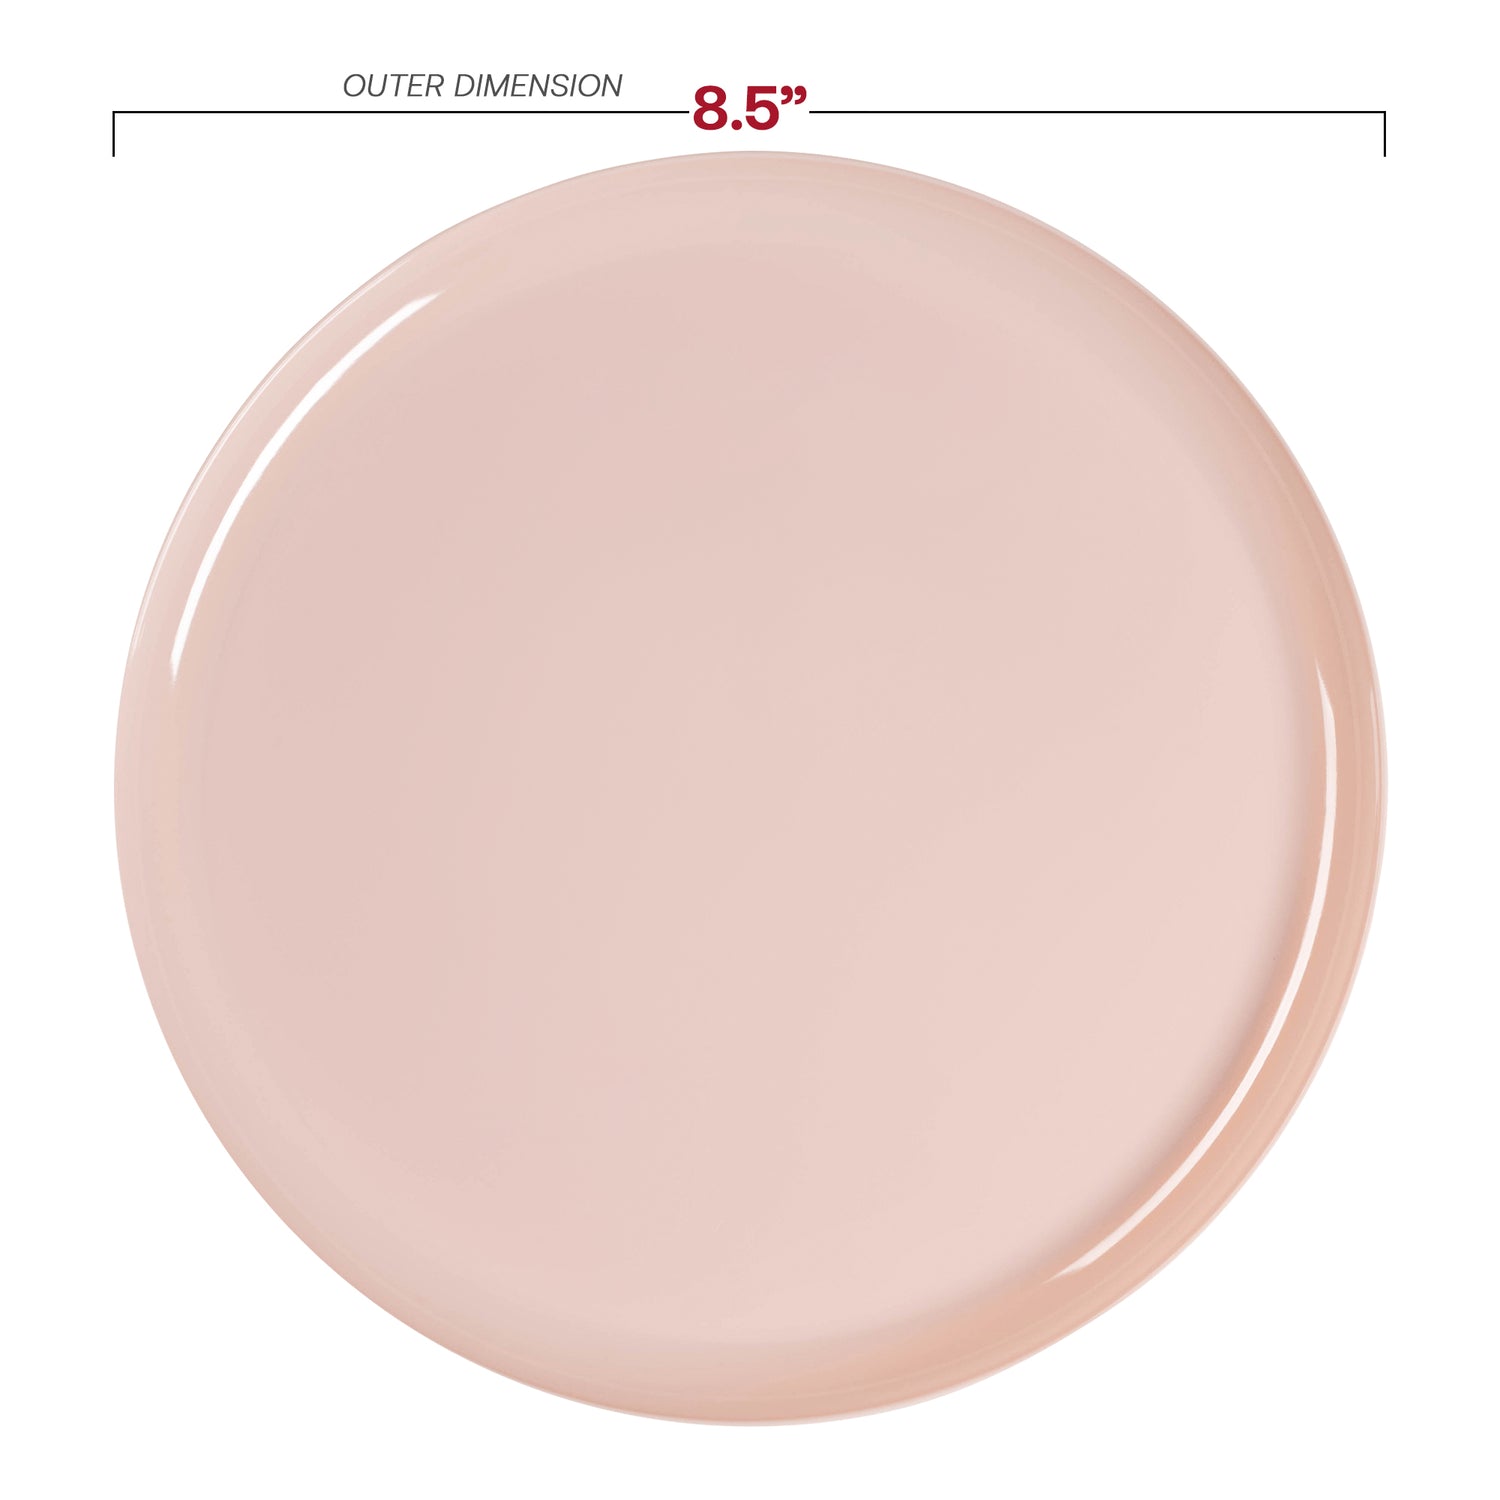 Pink Flat Round Disposable Plastic Appetizer/Salad Plates (8.5") Dimension | The Kaya Collection